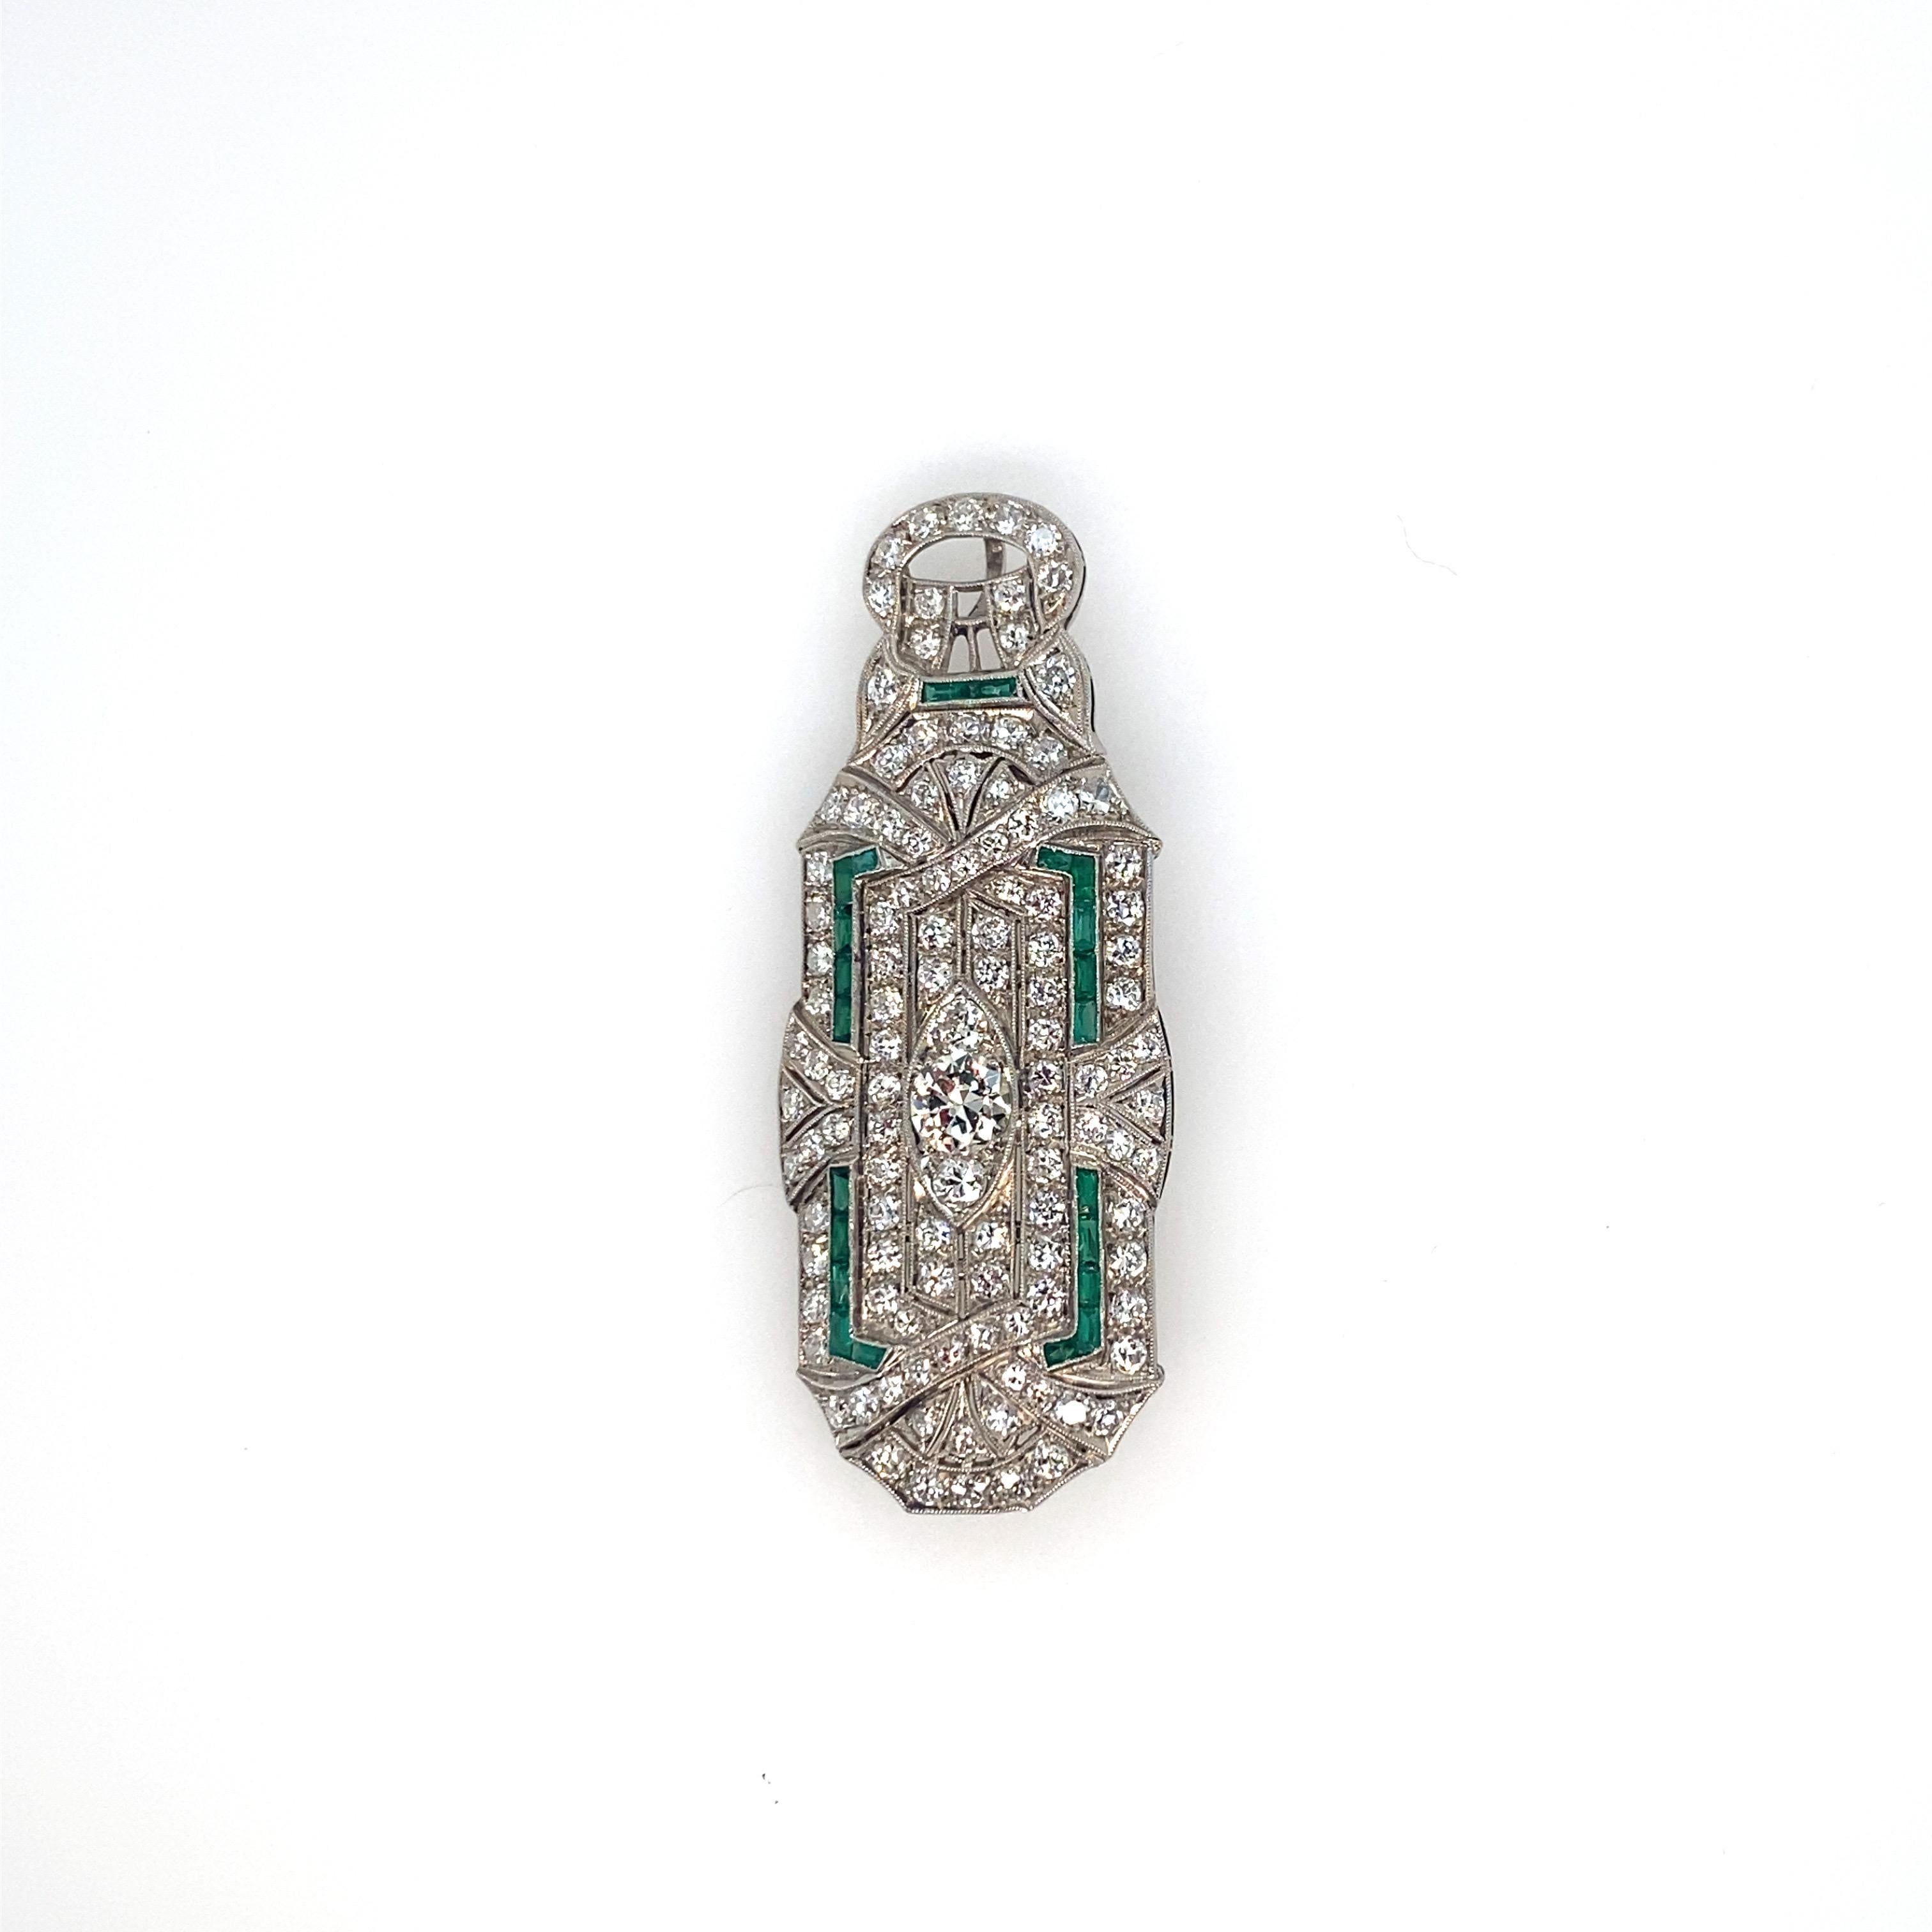 This beautiful one-of-a-kind pendant/ brooch was from the Estate of Alfred W. Miles.  Mr. Miles was a CPA in New York, and worked on the board of Tiffany's, was vice president of Bonwit Teller, and Chairman of the Hoving Corporation, when it